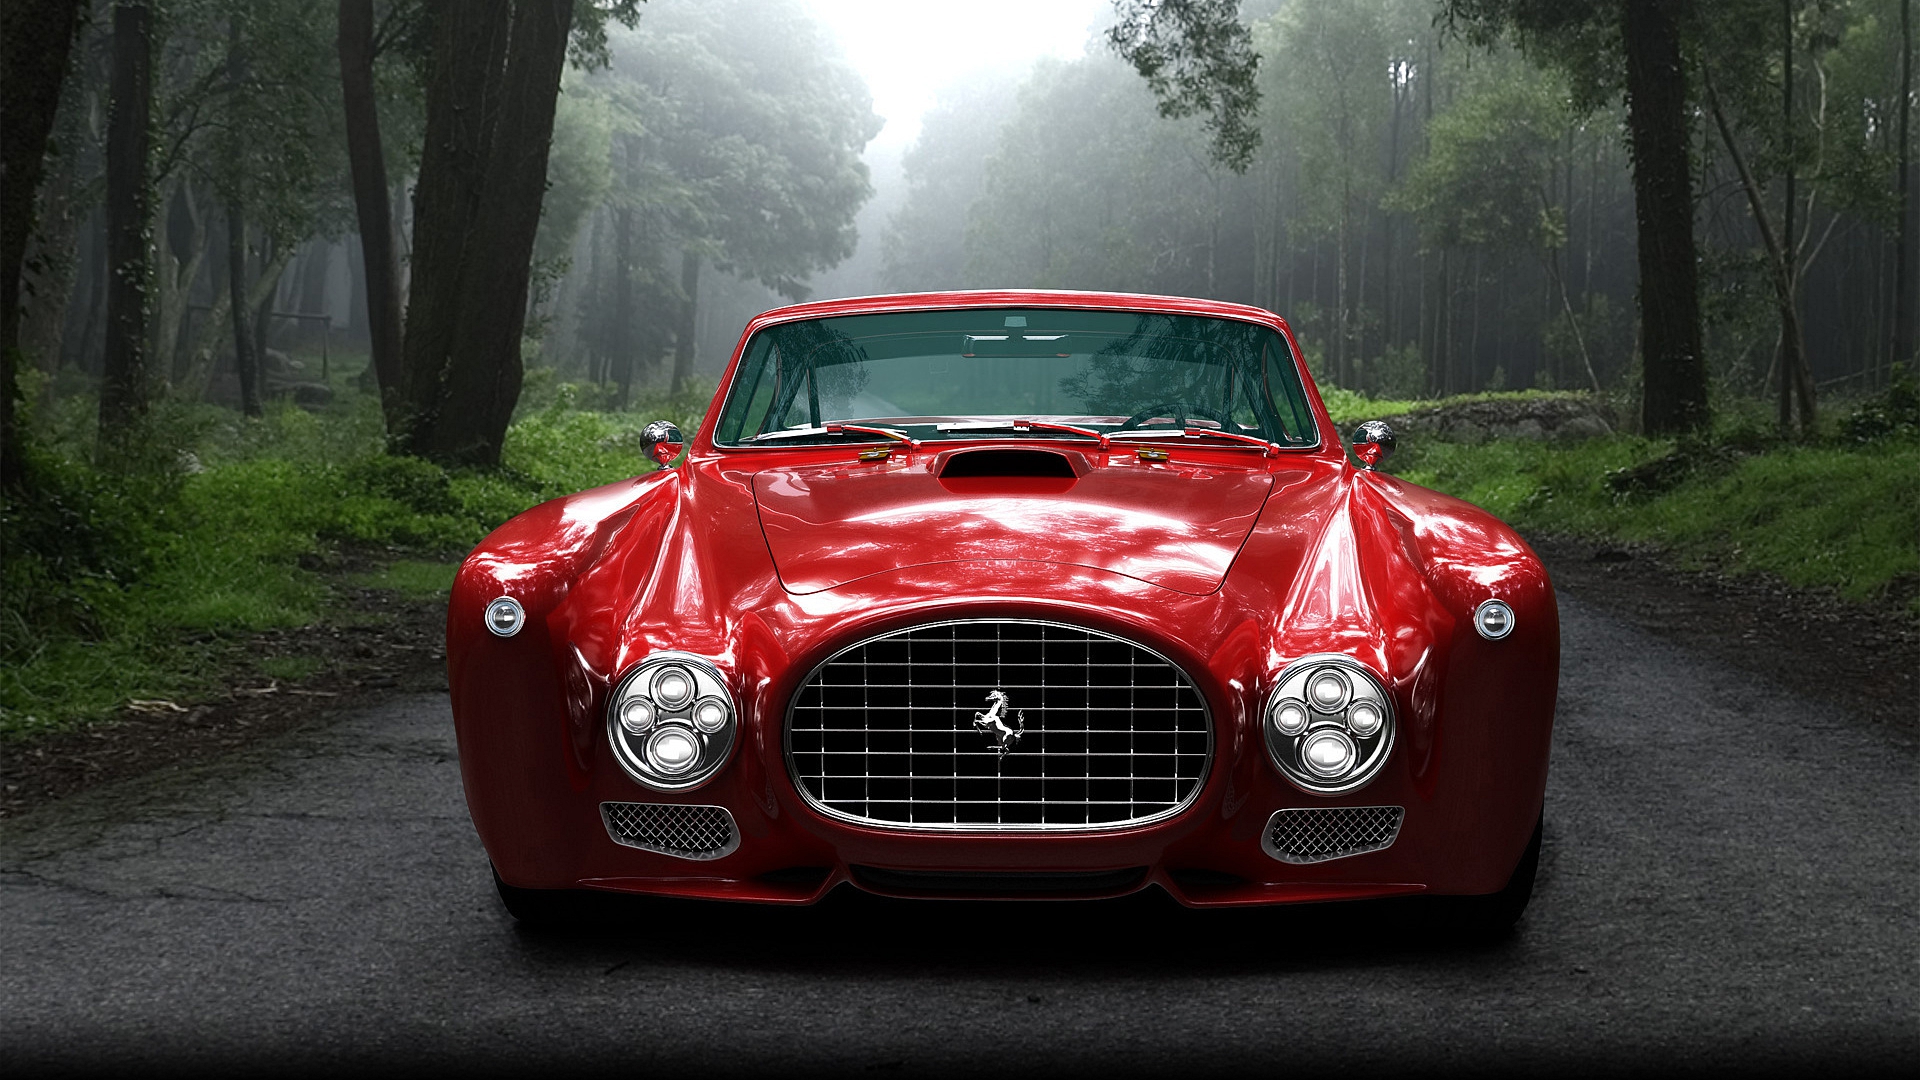 General 1920x1080 colorful photography car Ferrari vehicle frontal view red cars trees nature reflection sunlight italian cars Stellantis